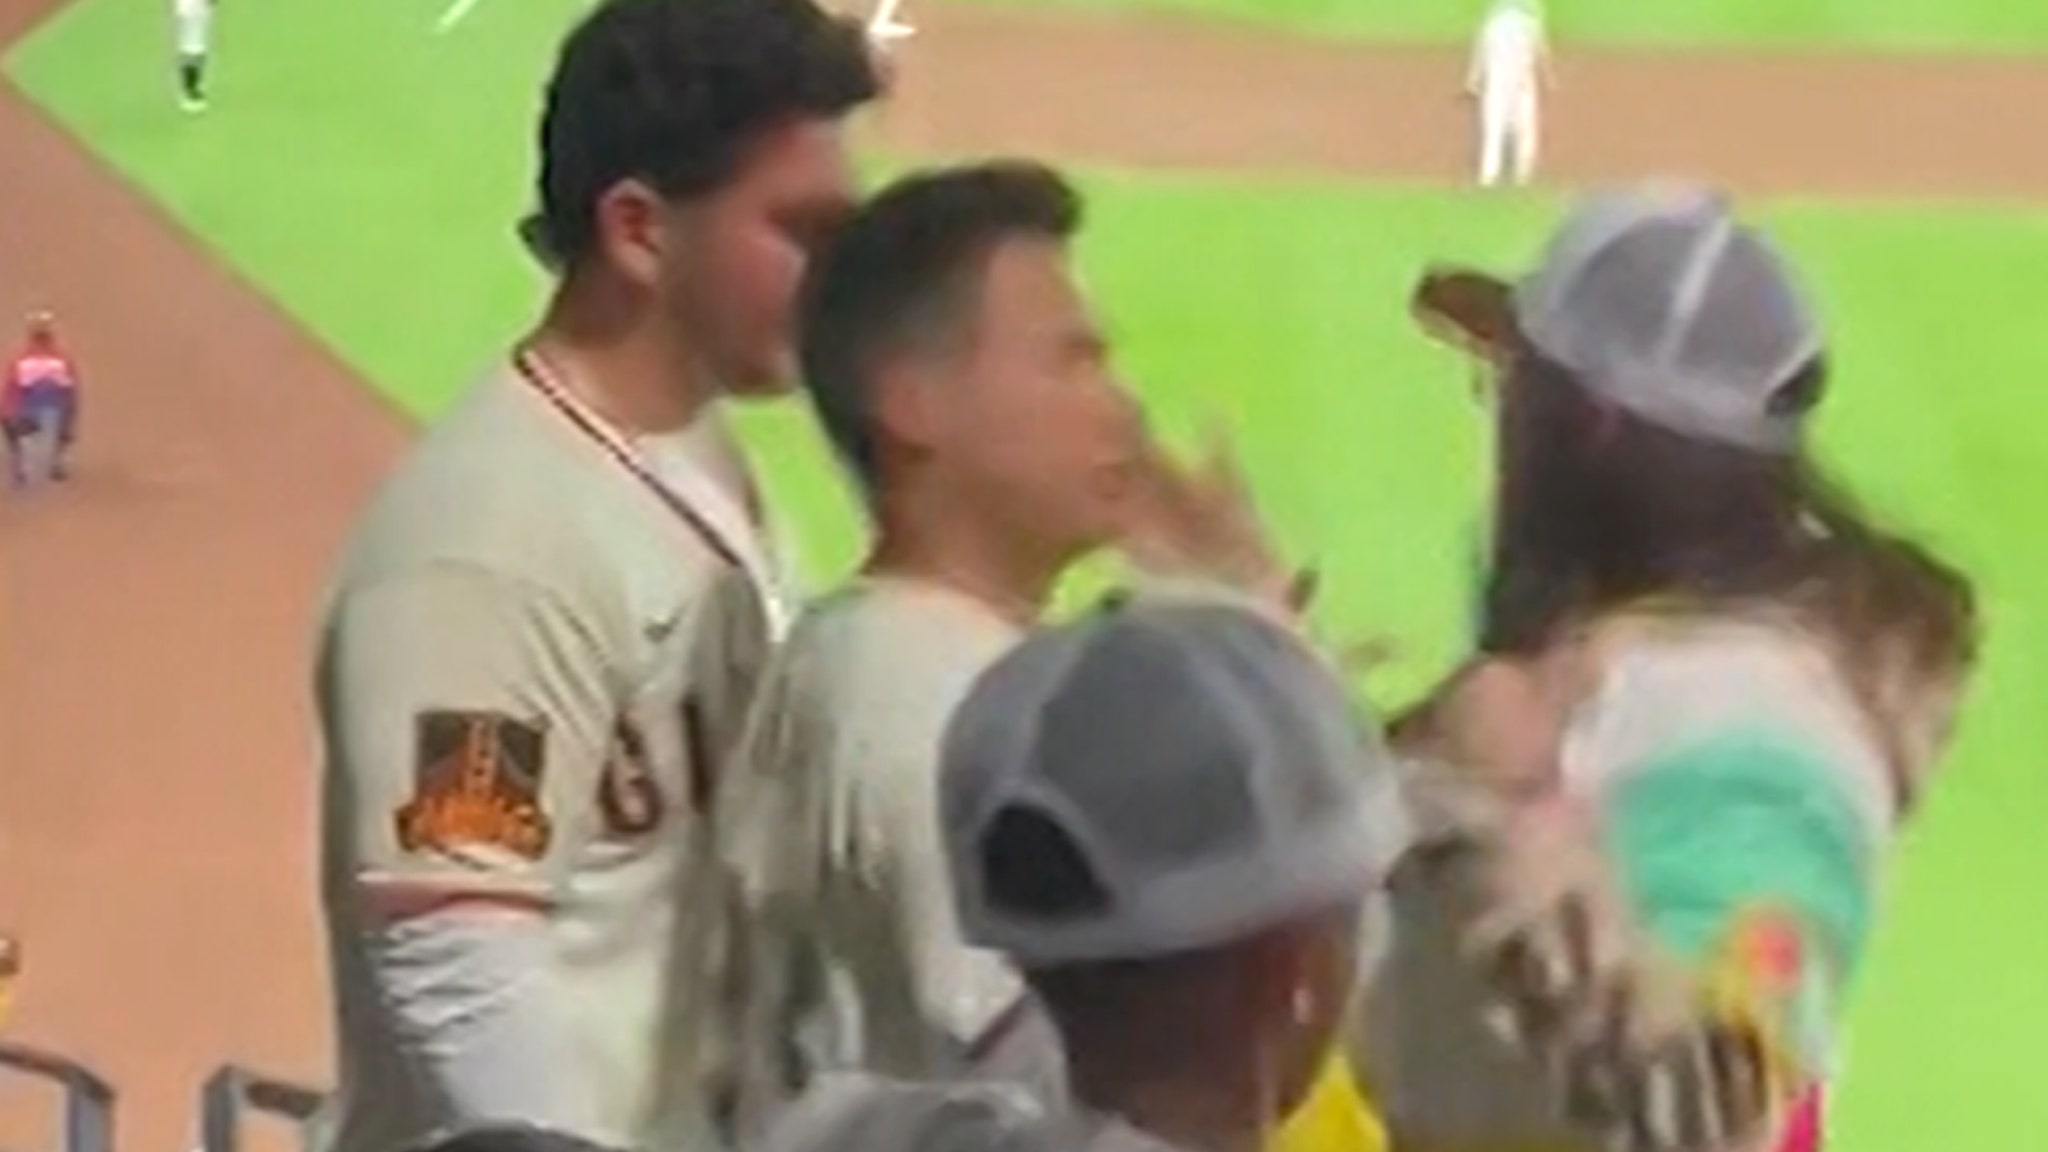 Fans of SF Giants and SD Padres Engage in Violent Altercation at Game, Captured on Video